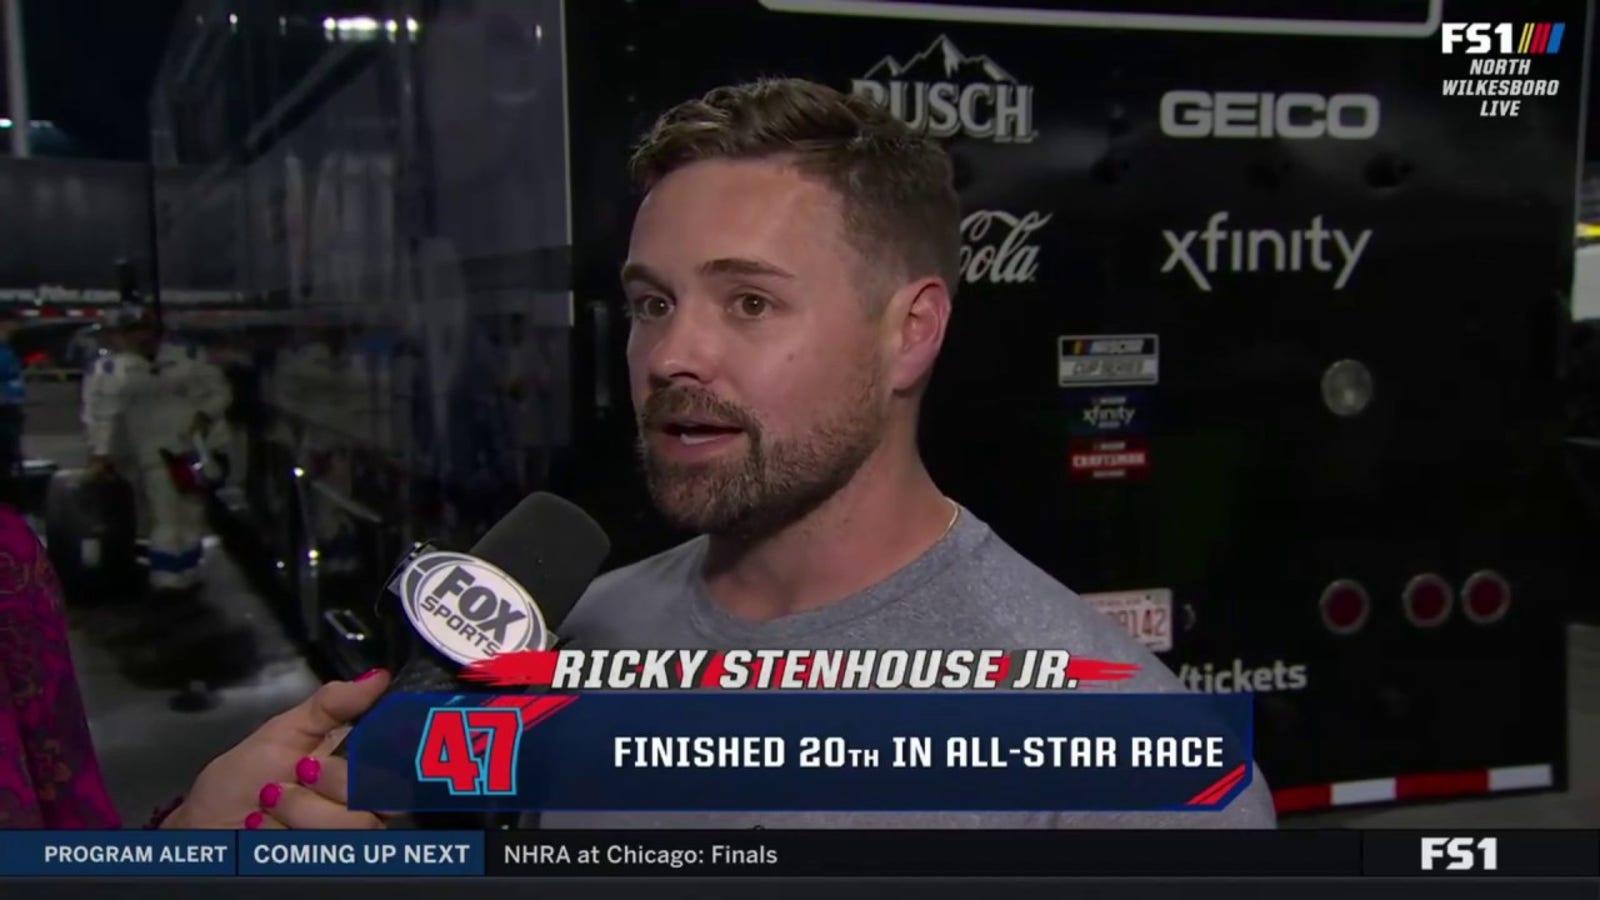  'He doesn't run as well as he used to' - Ricky Stenhouse Jr. after fight with Kyle Busch